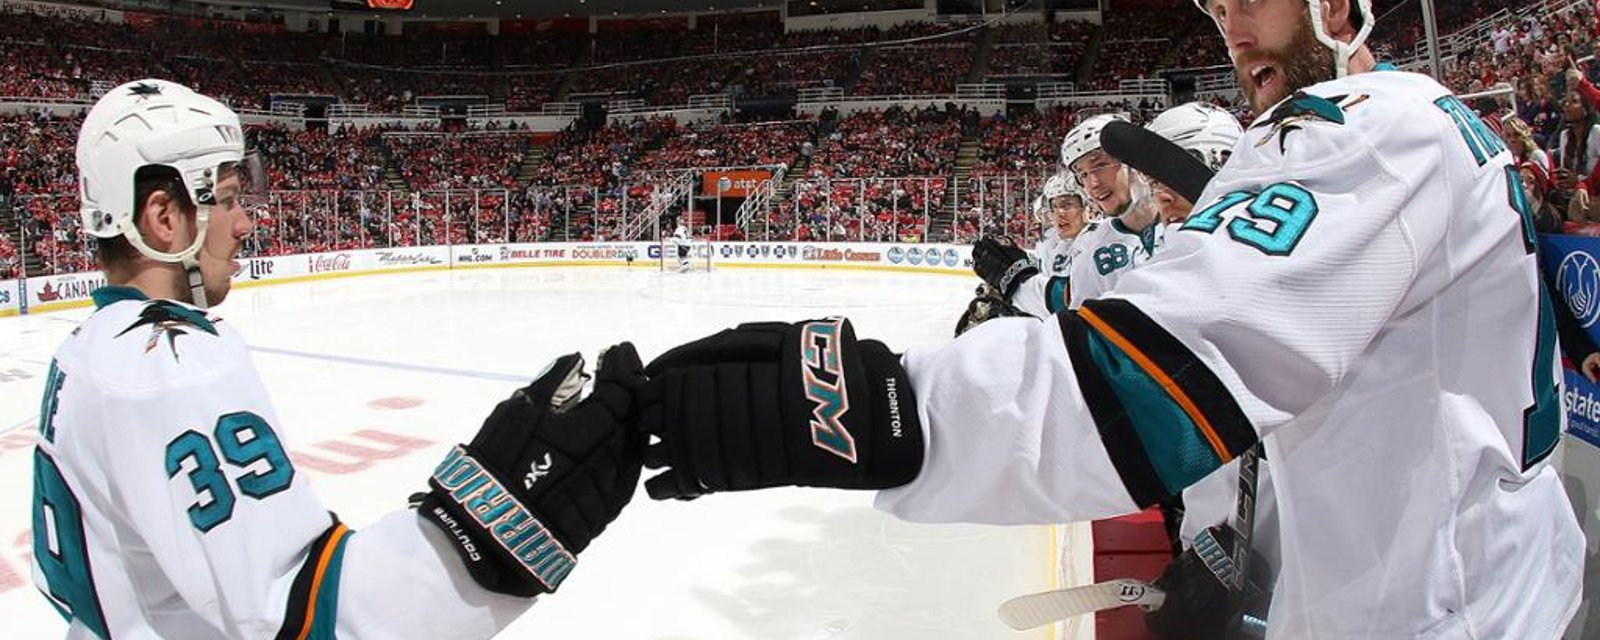 Logan Couture reacts to Thornton signature. 